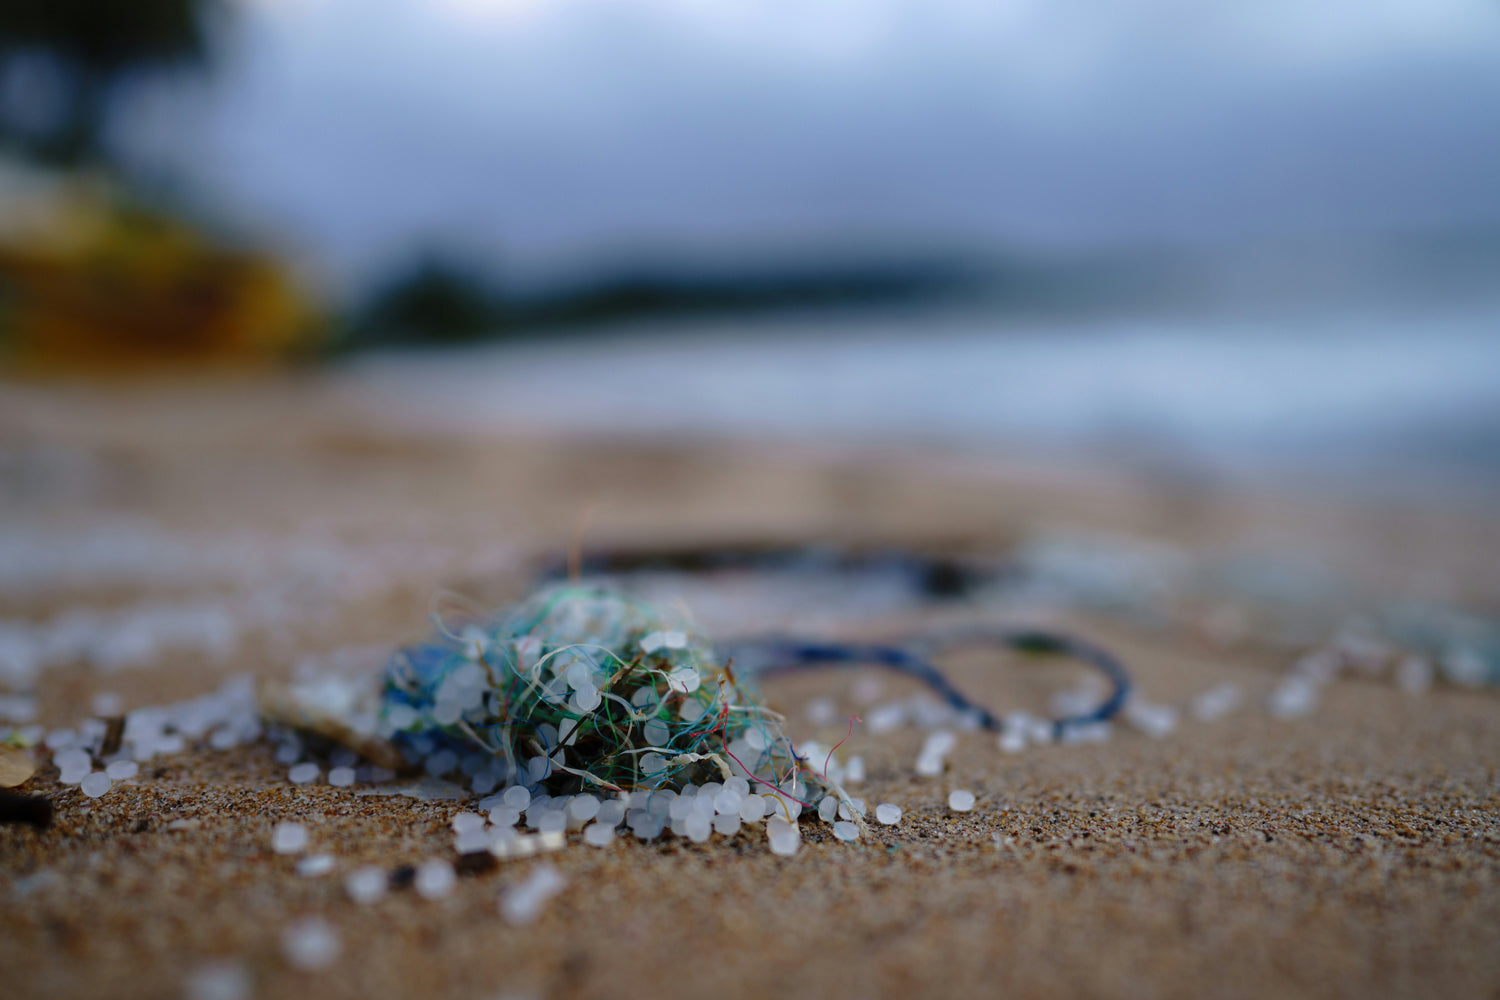 Recent law about the use of intentionally added microplastics